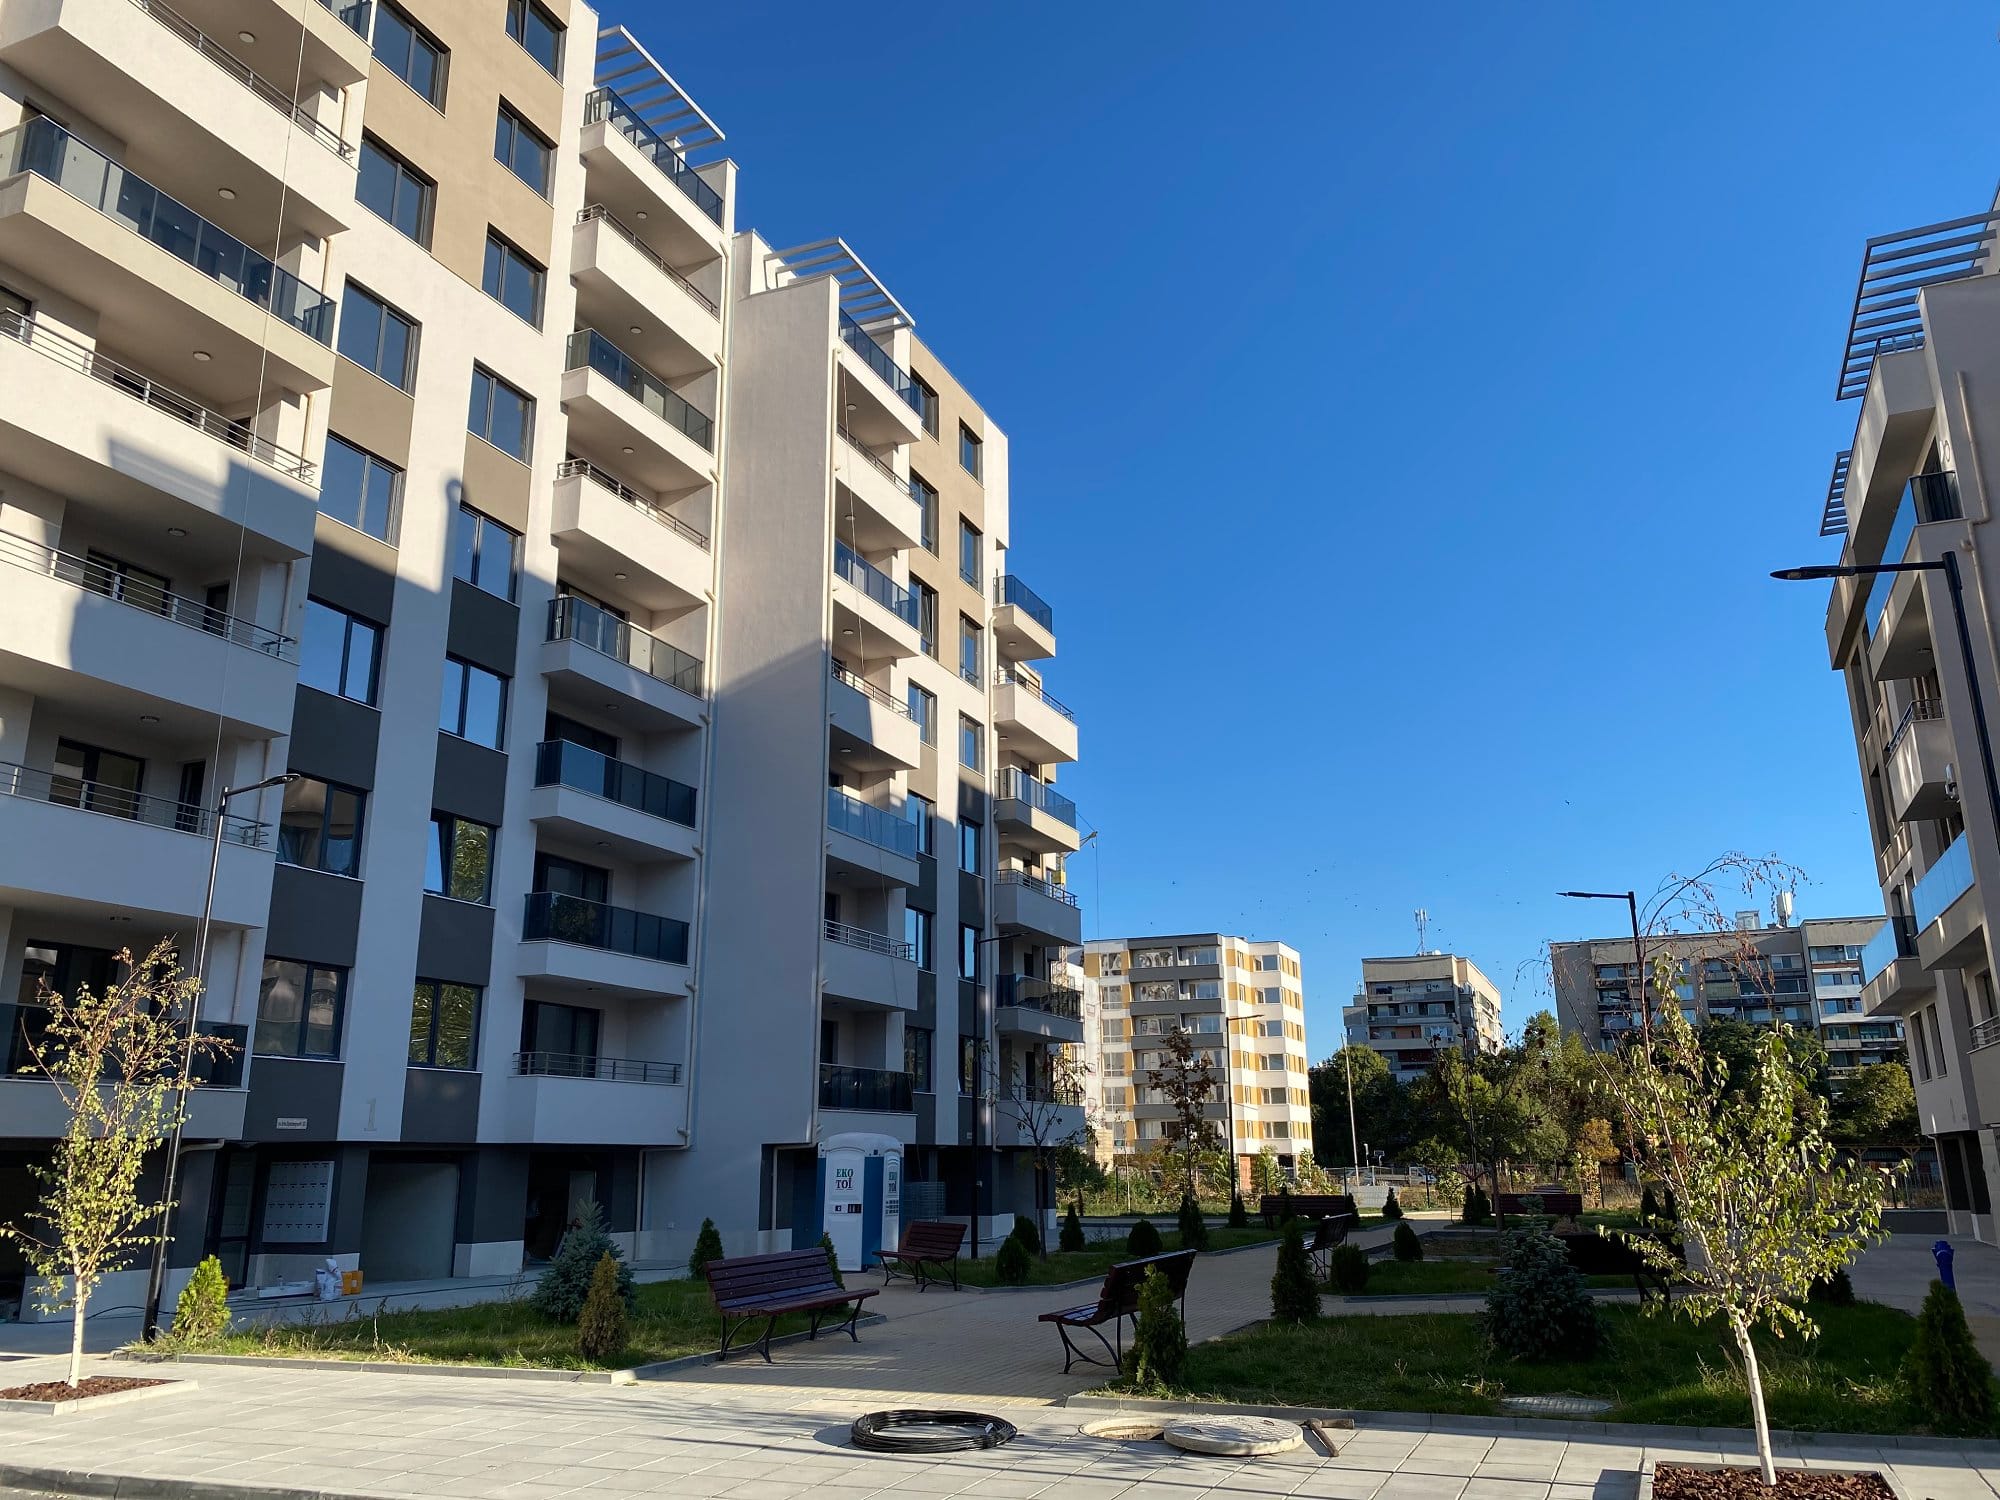 A sunny day in a modern residential complex with multi-storey apartment buildings, landscaped green areas, benches, and young trees in Plovdiv, Bulgaria